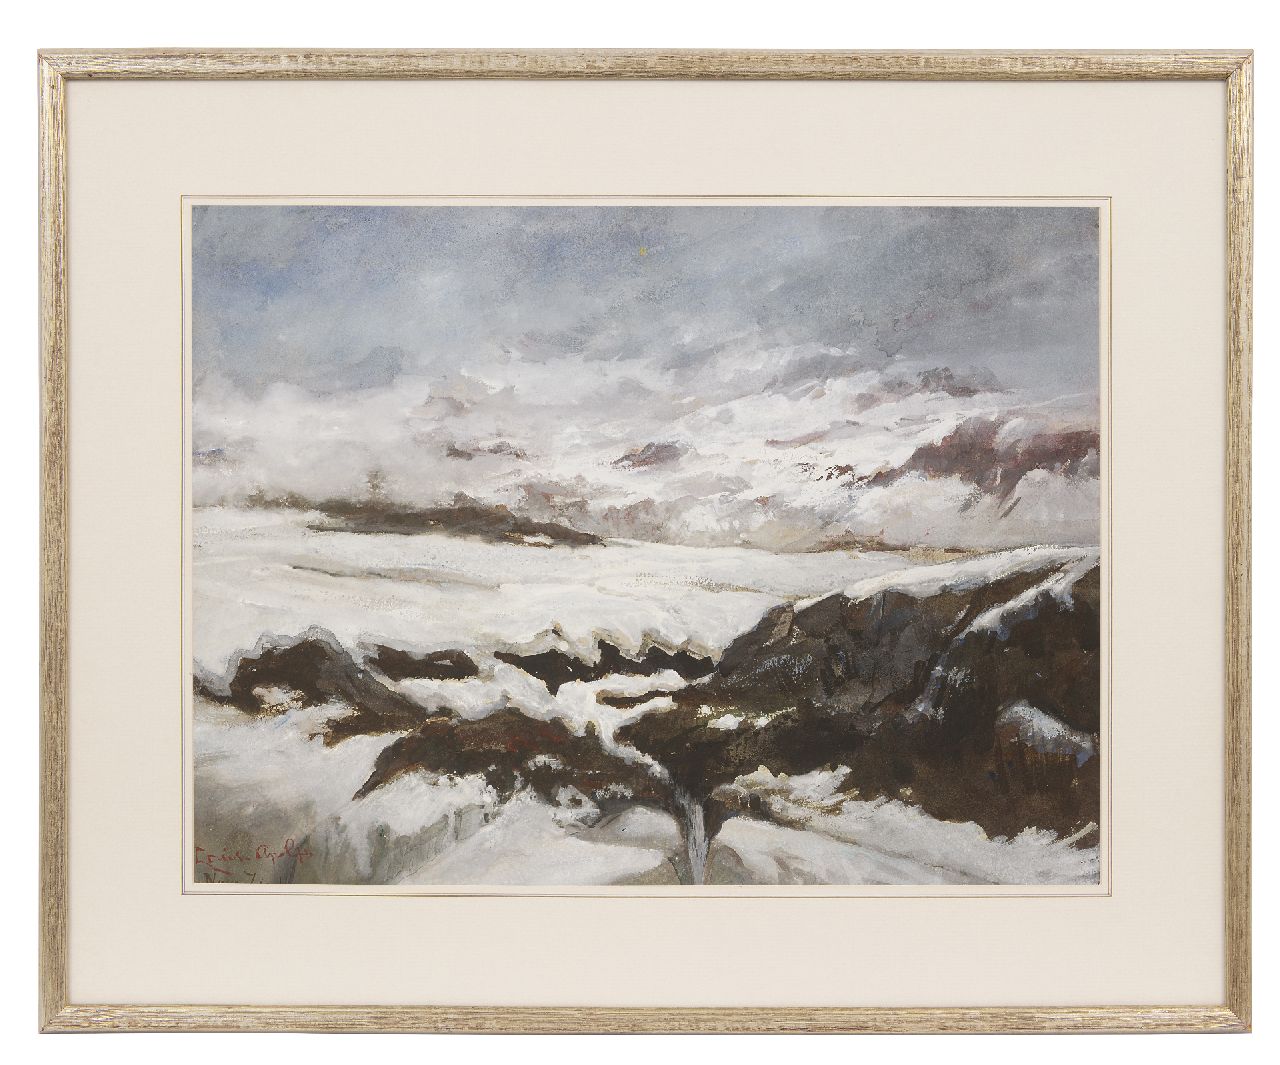 Apol L.F.H.  | Lodewijk Franciscus Hendrik 'Louis' Apol | Watercolours and drawings offered for sale | At Nova Zembla, gouache on paper 47.5 x 63.0 cm, signed l.l. and to be dated 1880